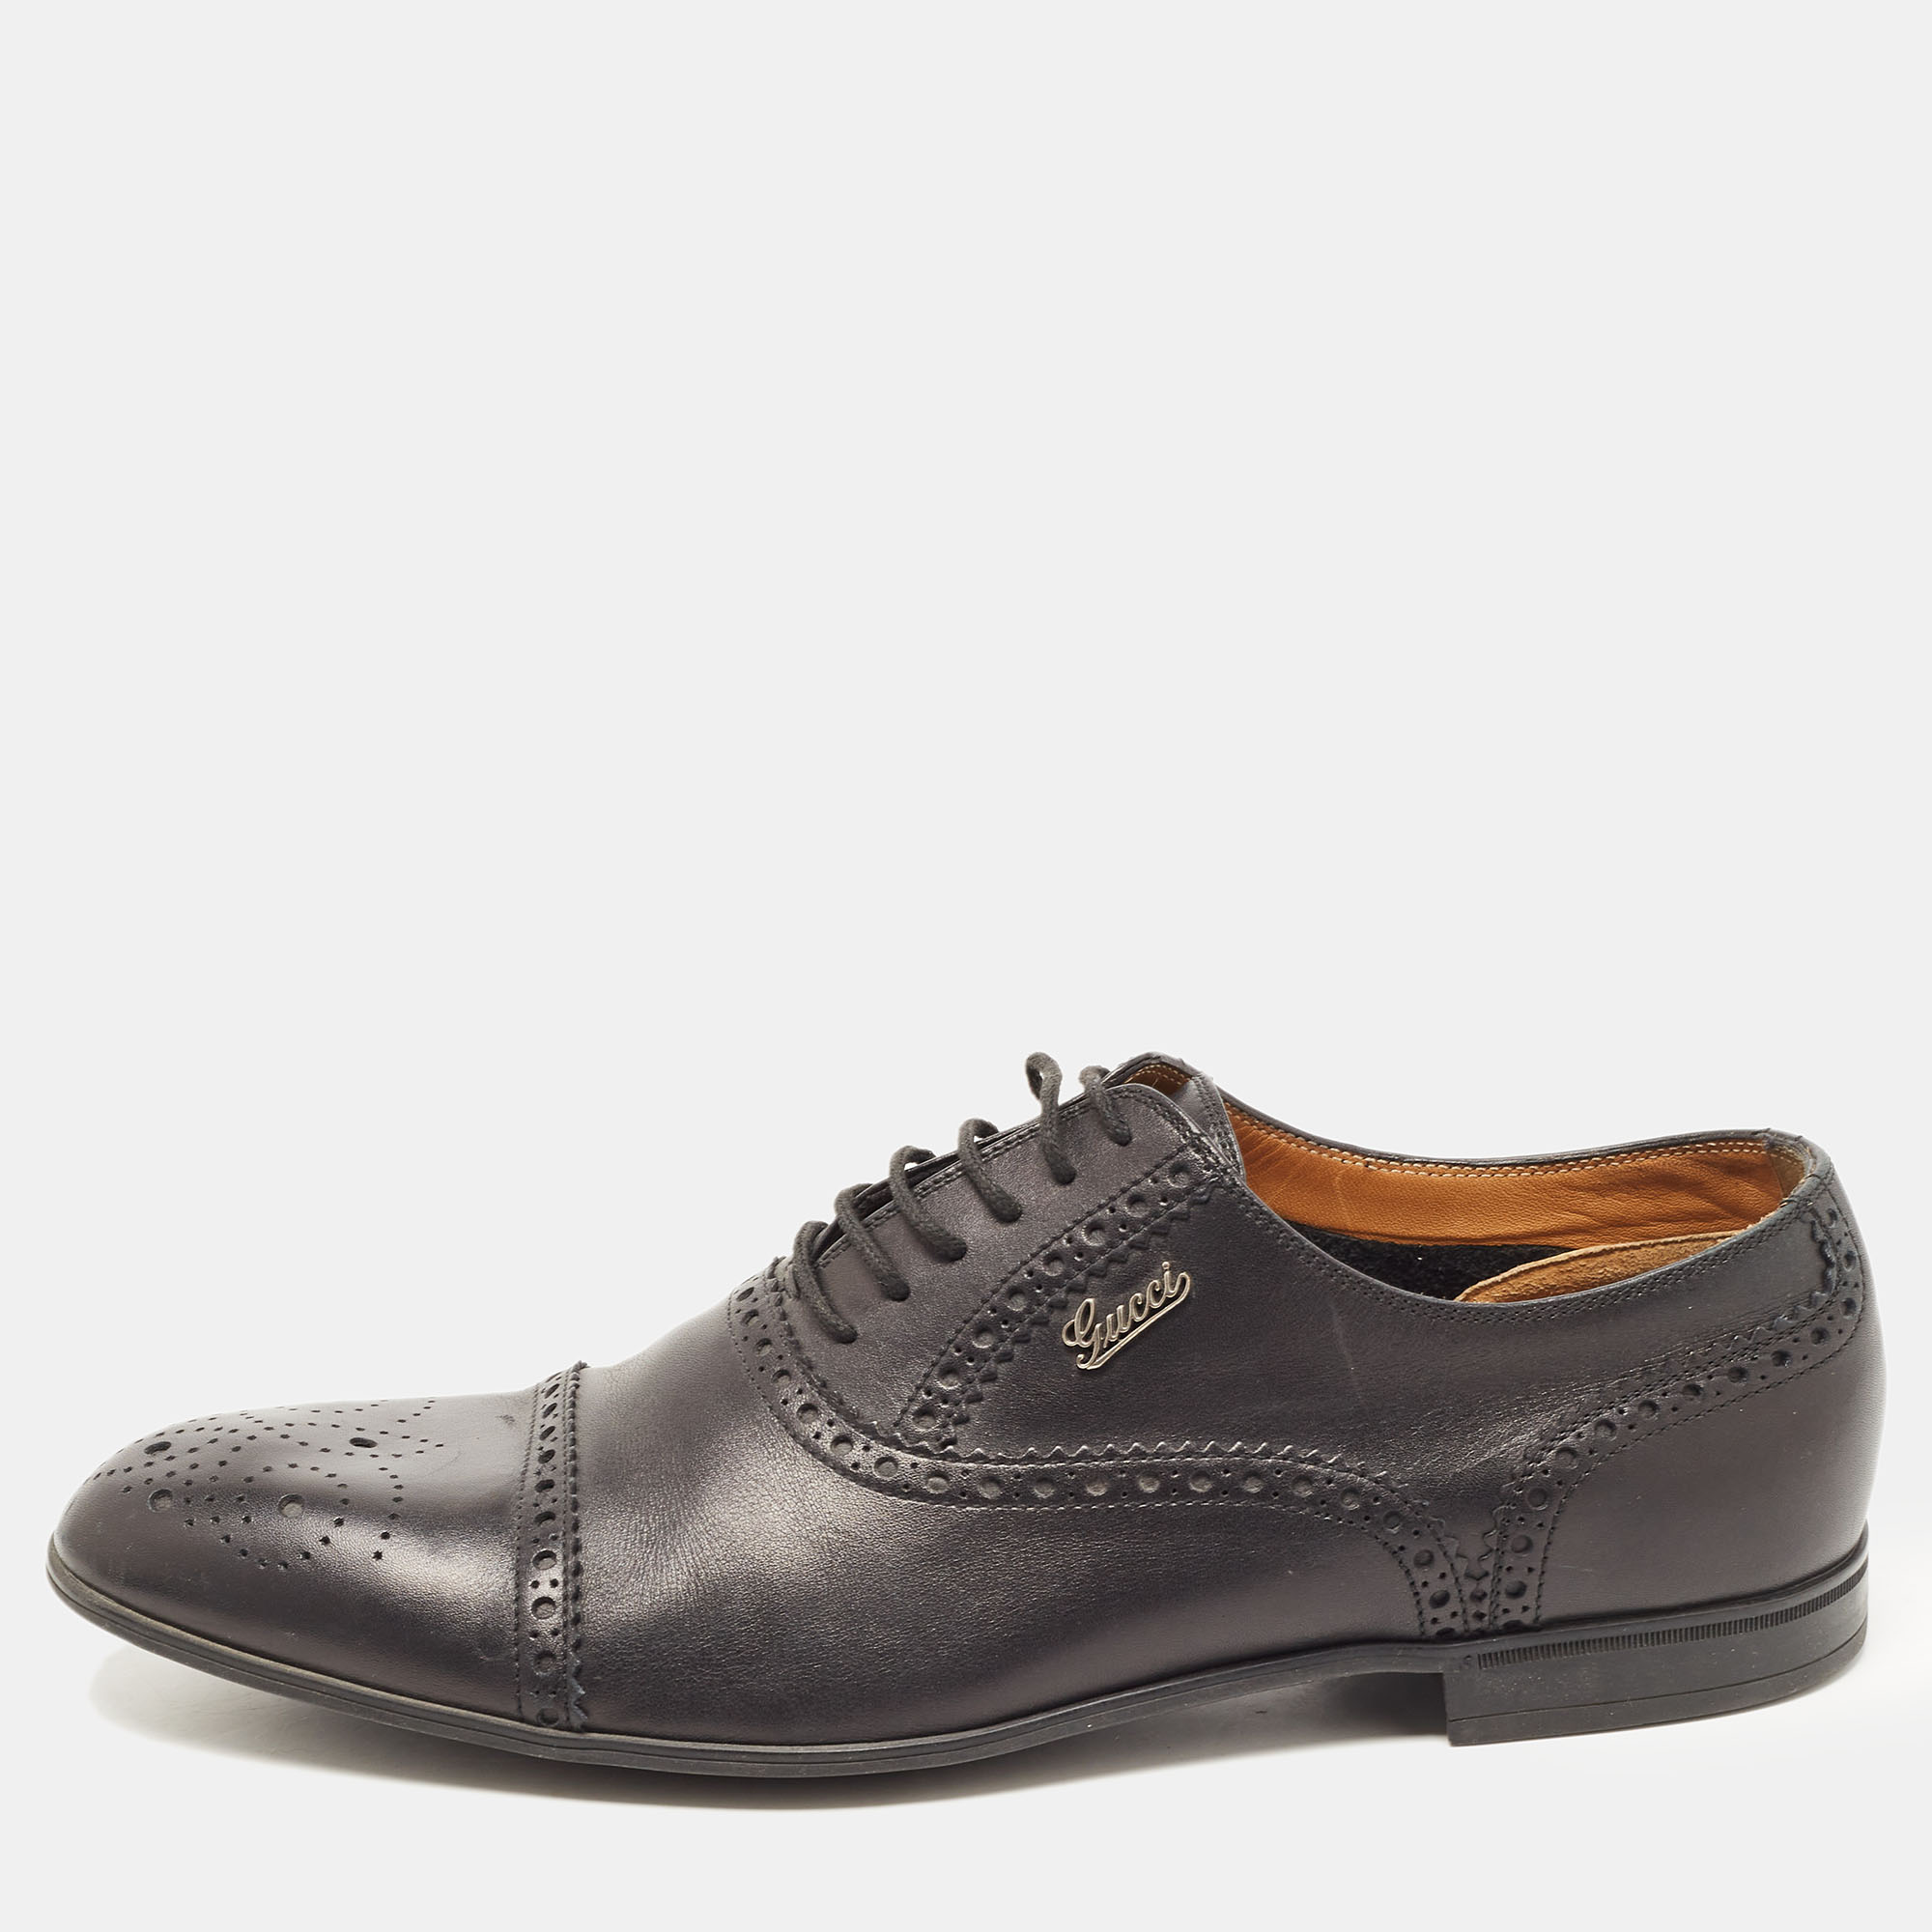 Gucci Black Leather Brogue Lace Up Oxfords Size 42